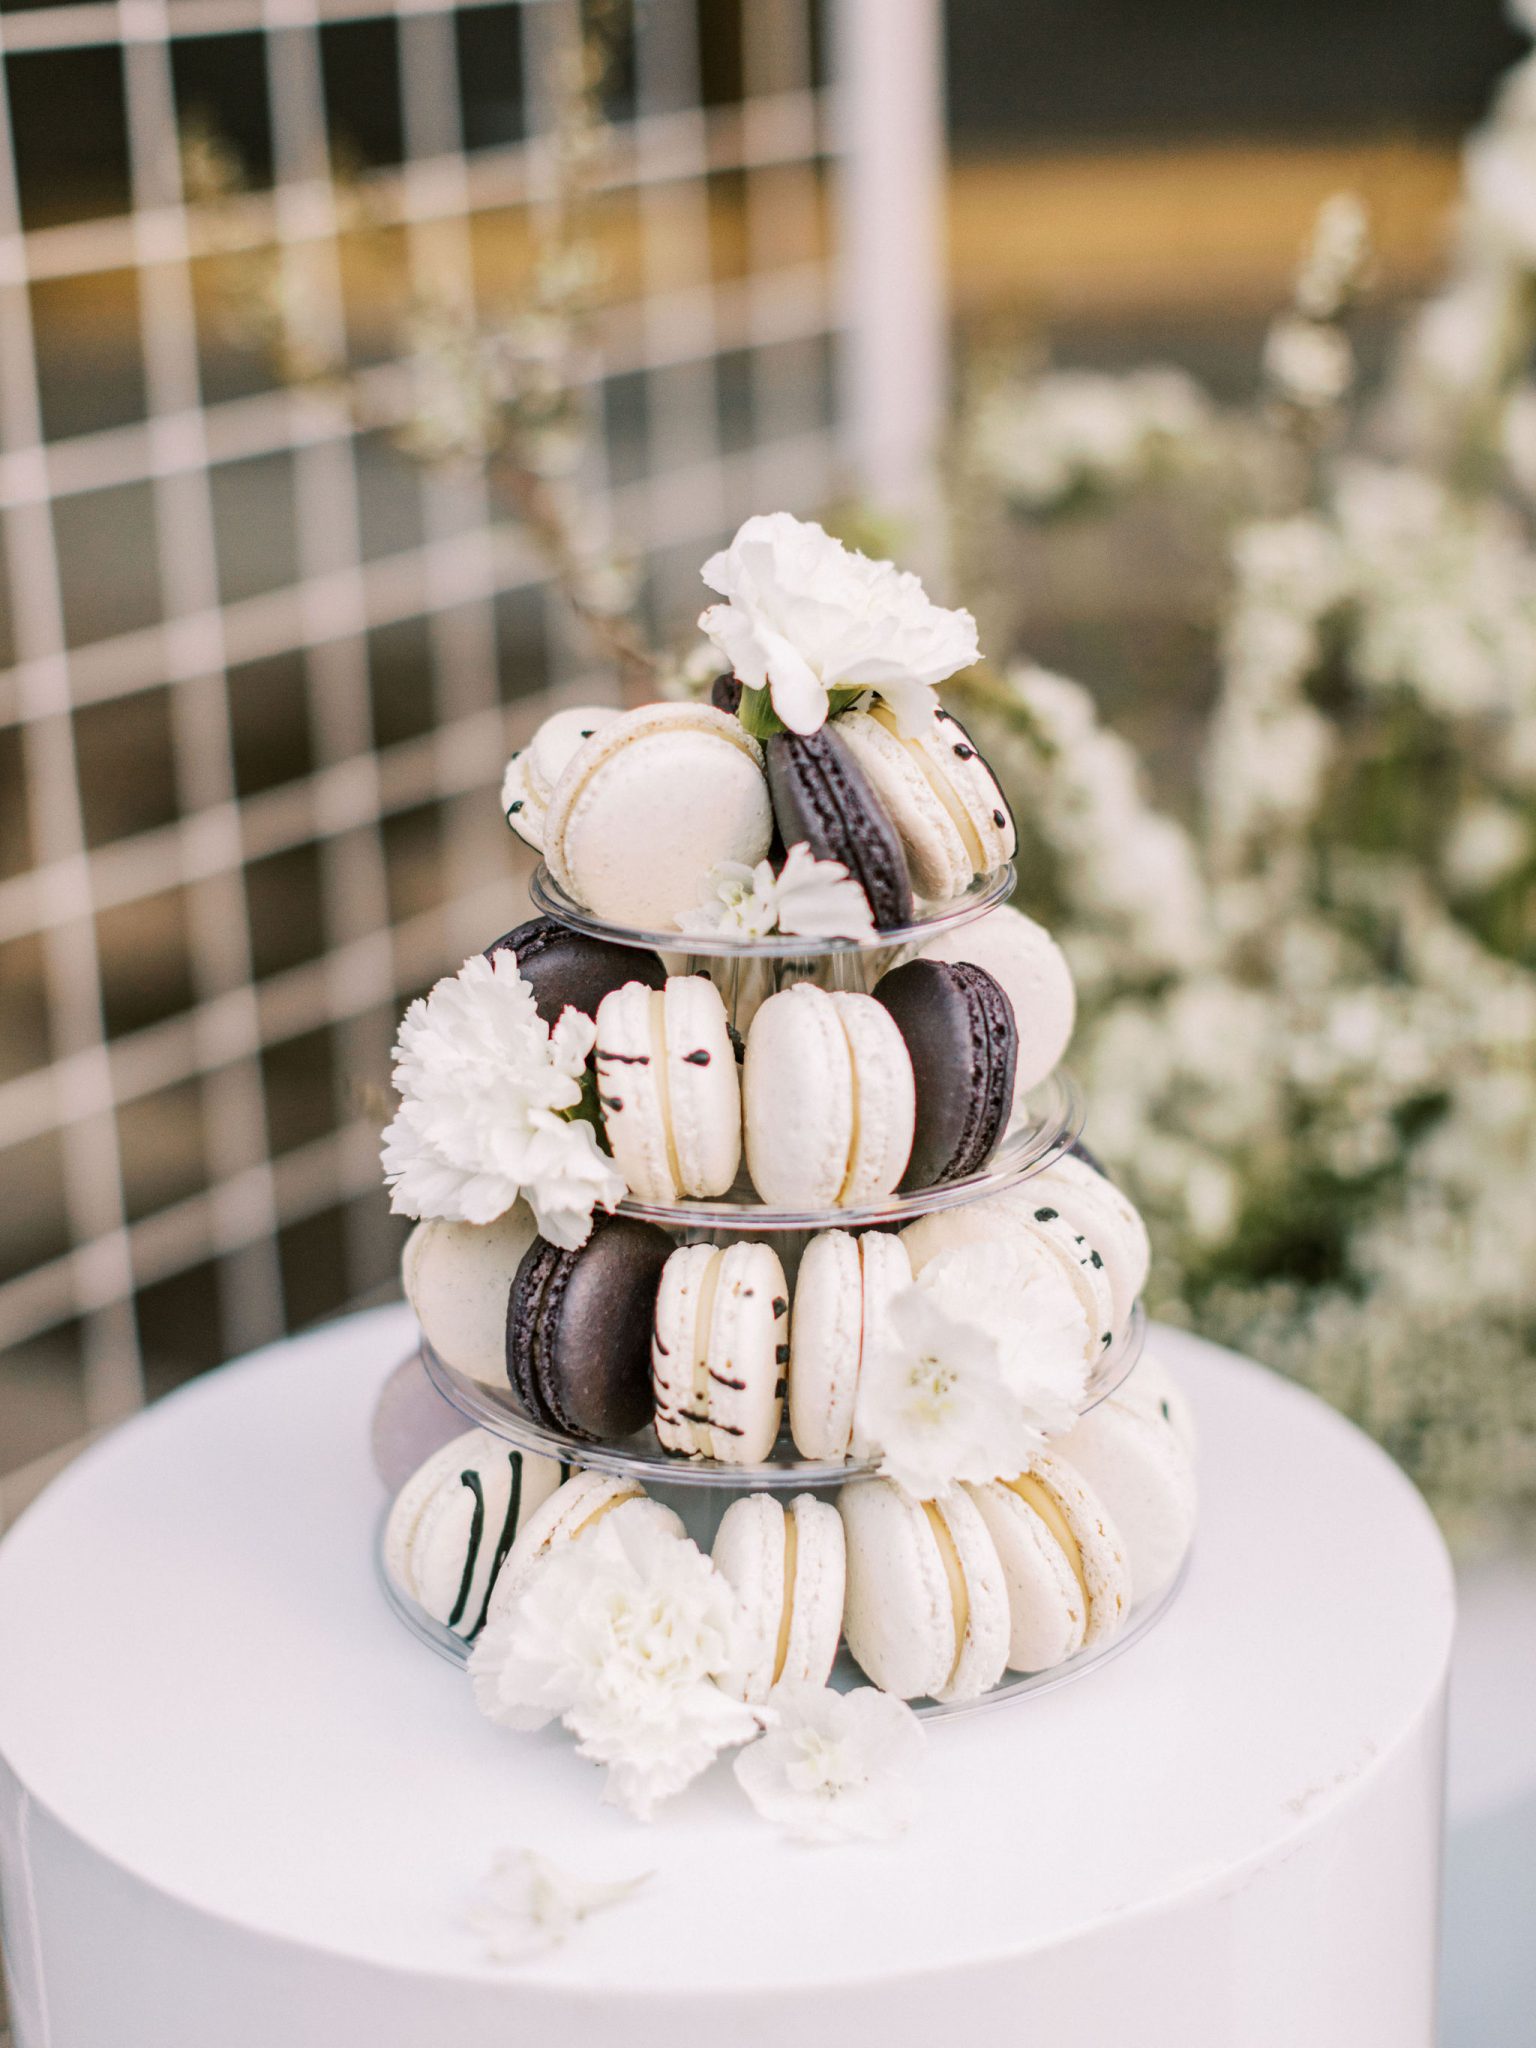 Black and white macarons with flowers for a wedding day dessert